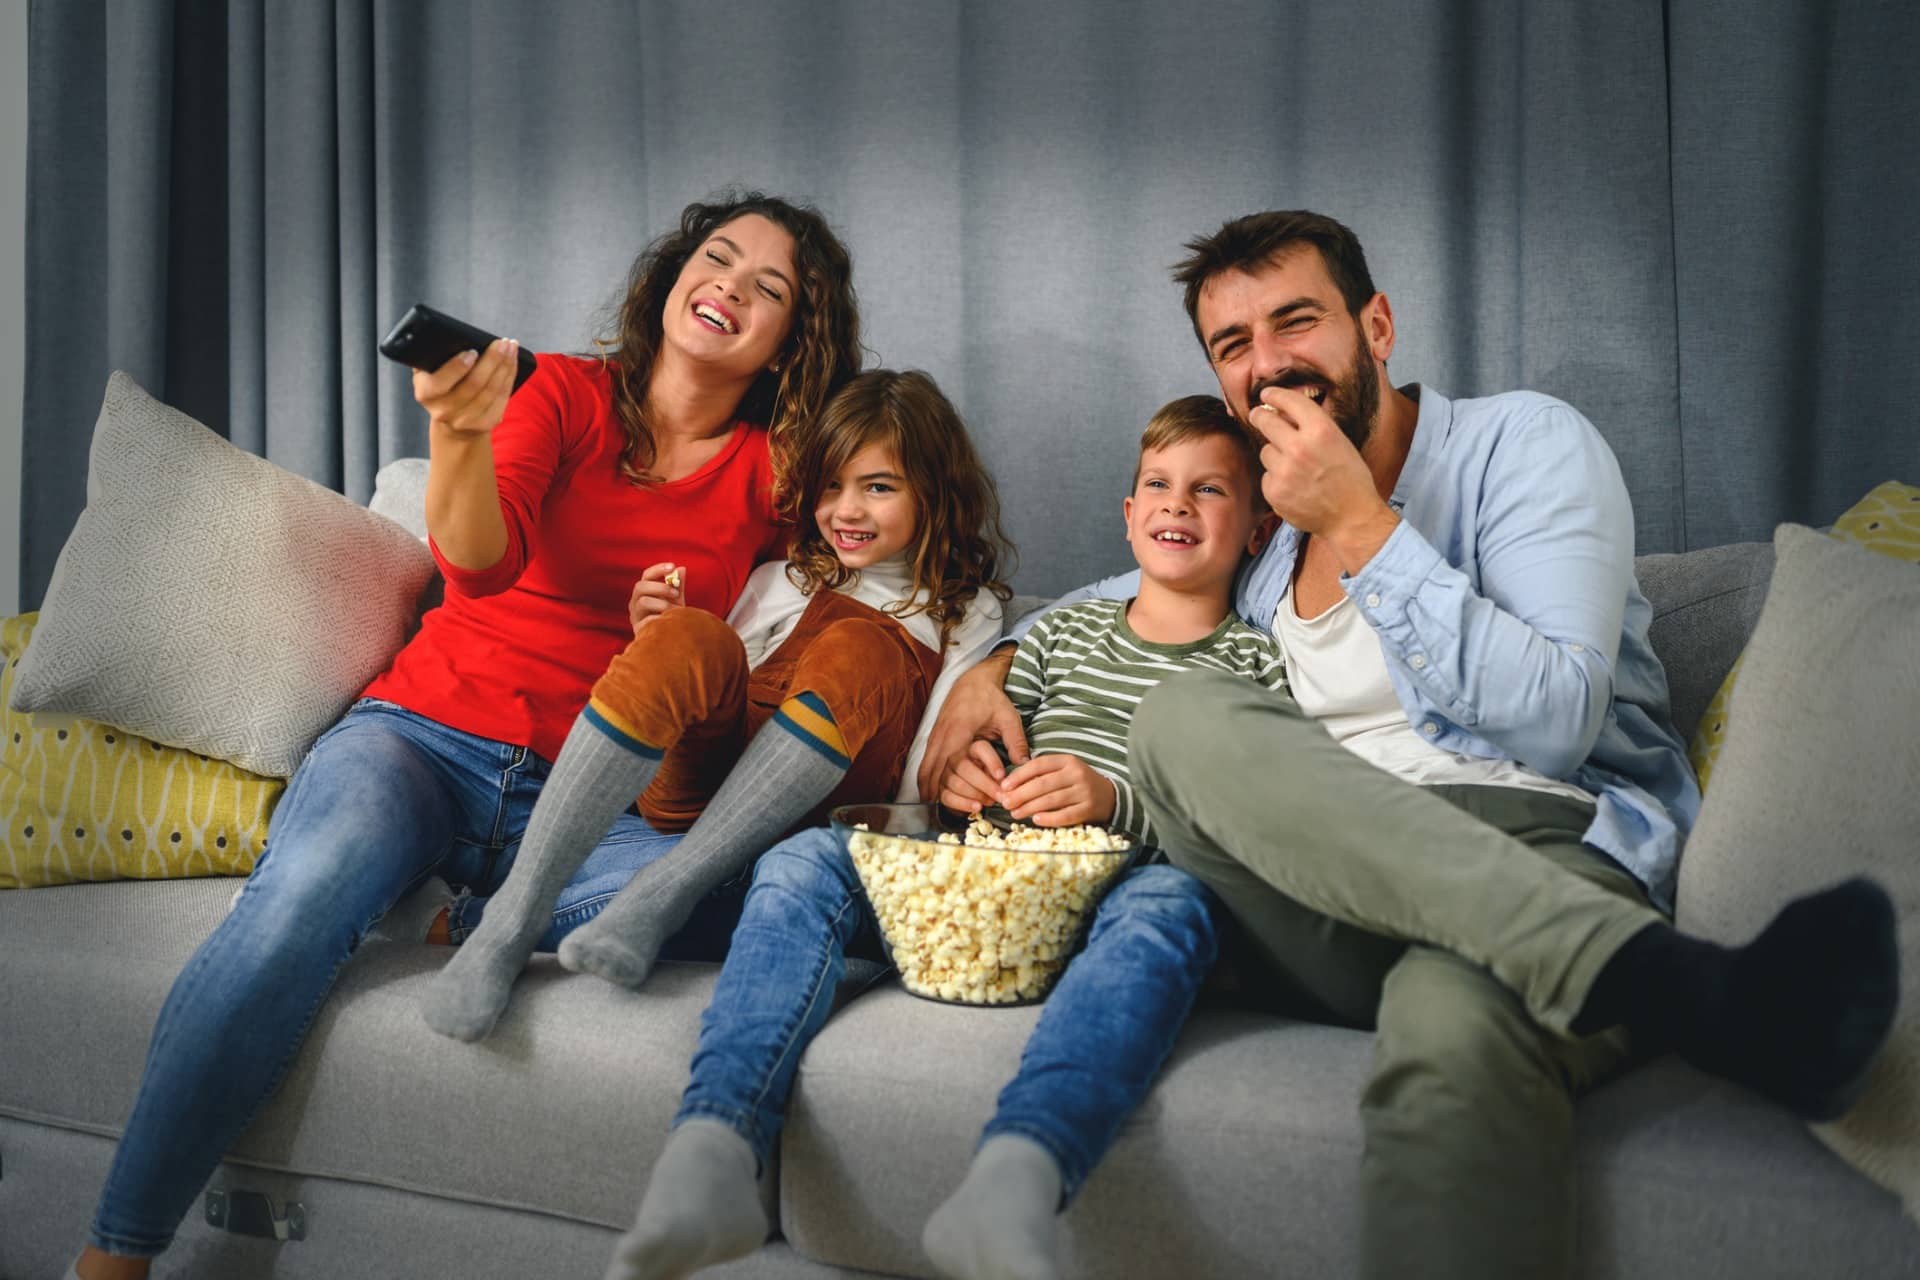 A family eating popcorn and watching a movie as a fun summertime activity.